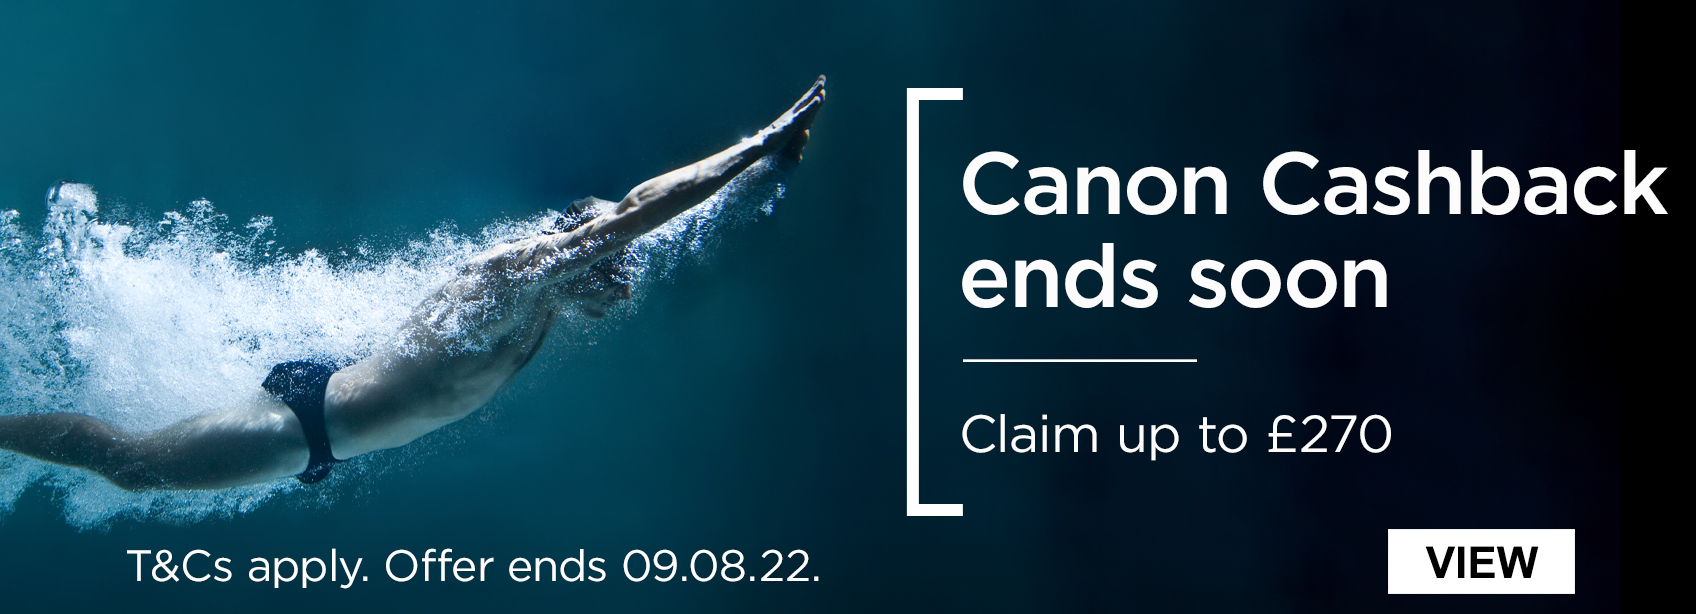 Canon Cashback ends soon - claim up to £270 (T&Cs apply. Offer ends 09.08.22)